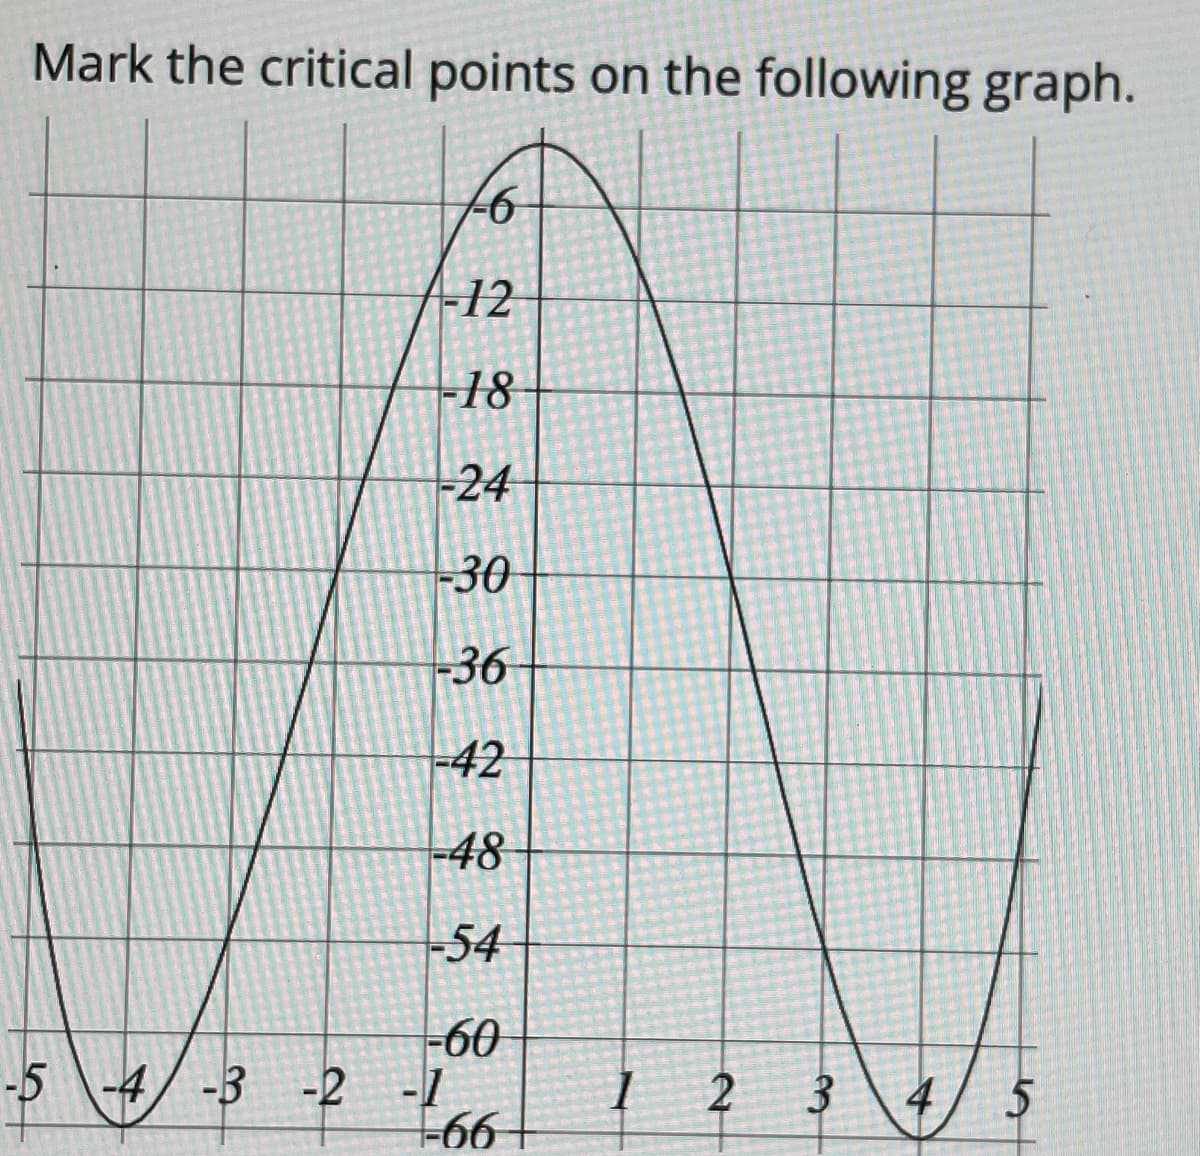 Mark the critical points on the following graph.
-6
-12
-18
24
-30
-36
-42
-48
-54
-60
-4/ -3 -2 -1
+66
-5
2
5
